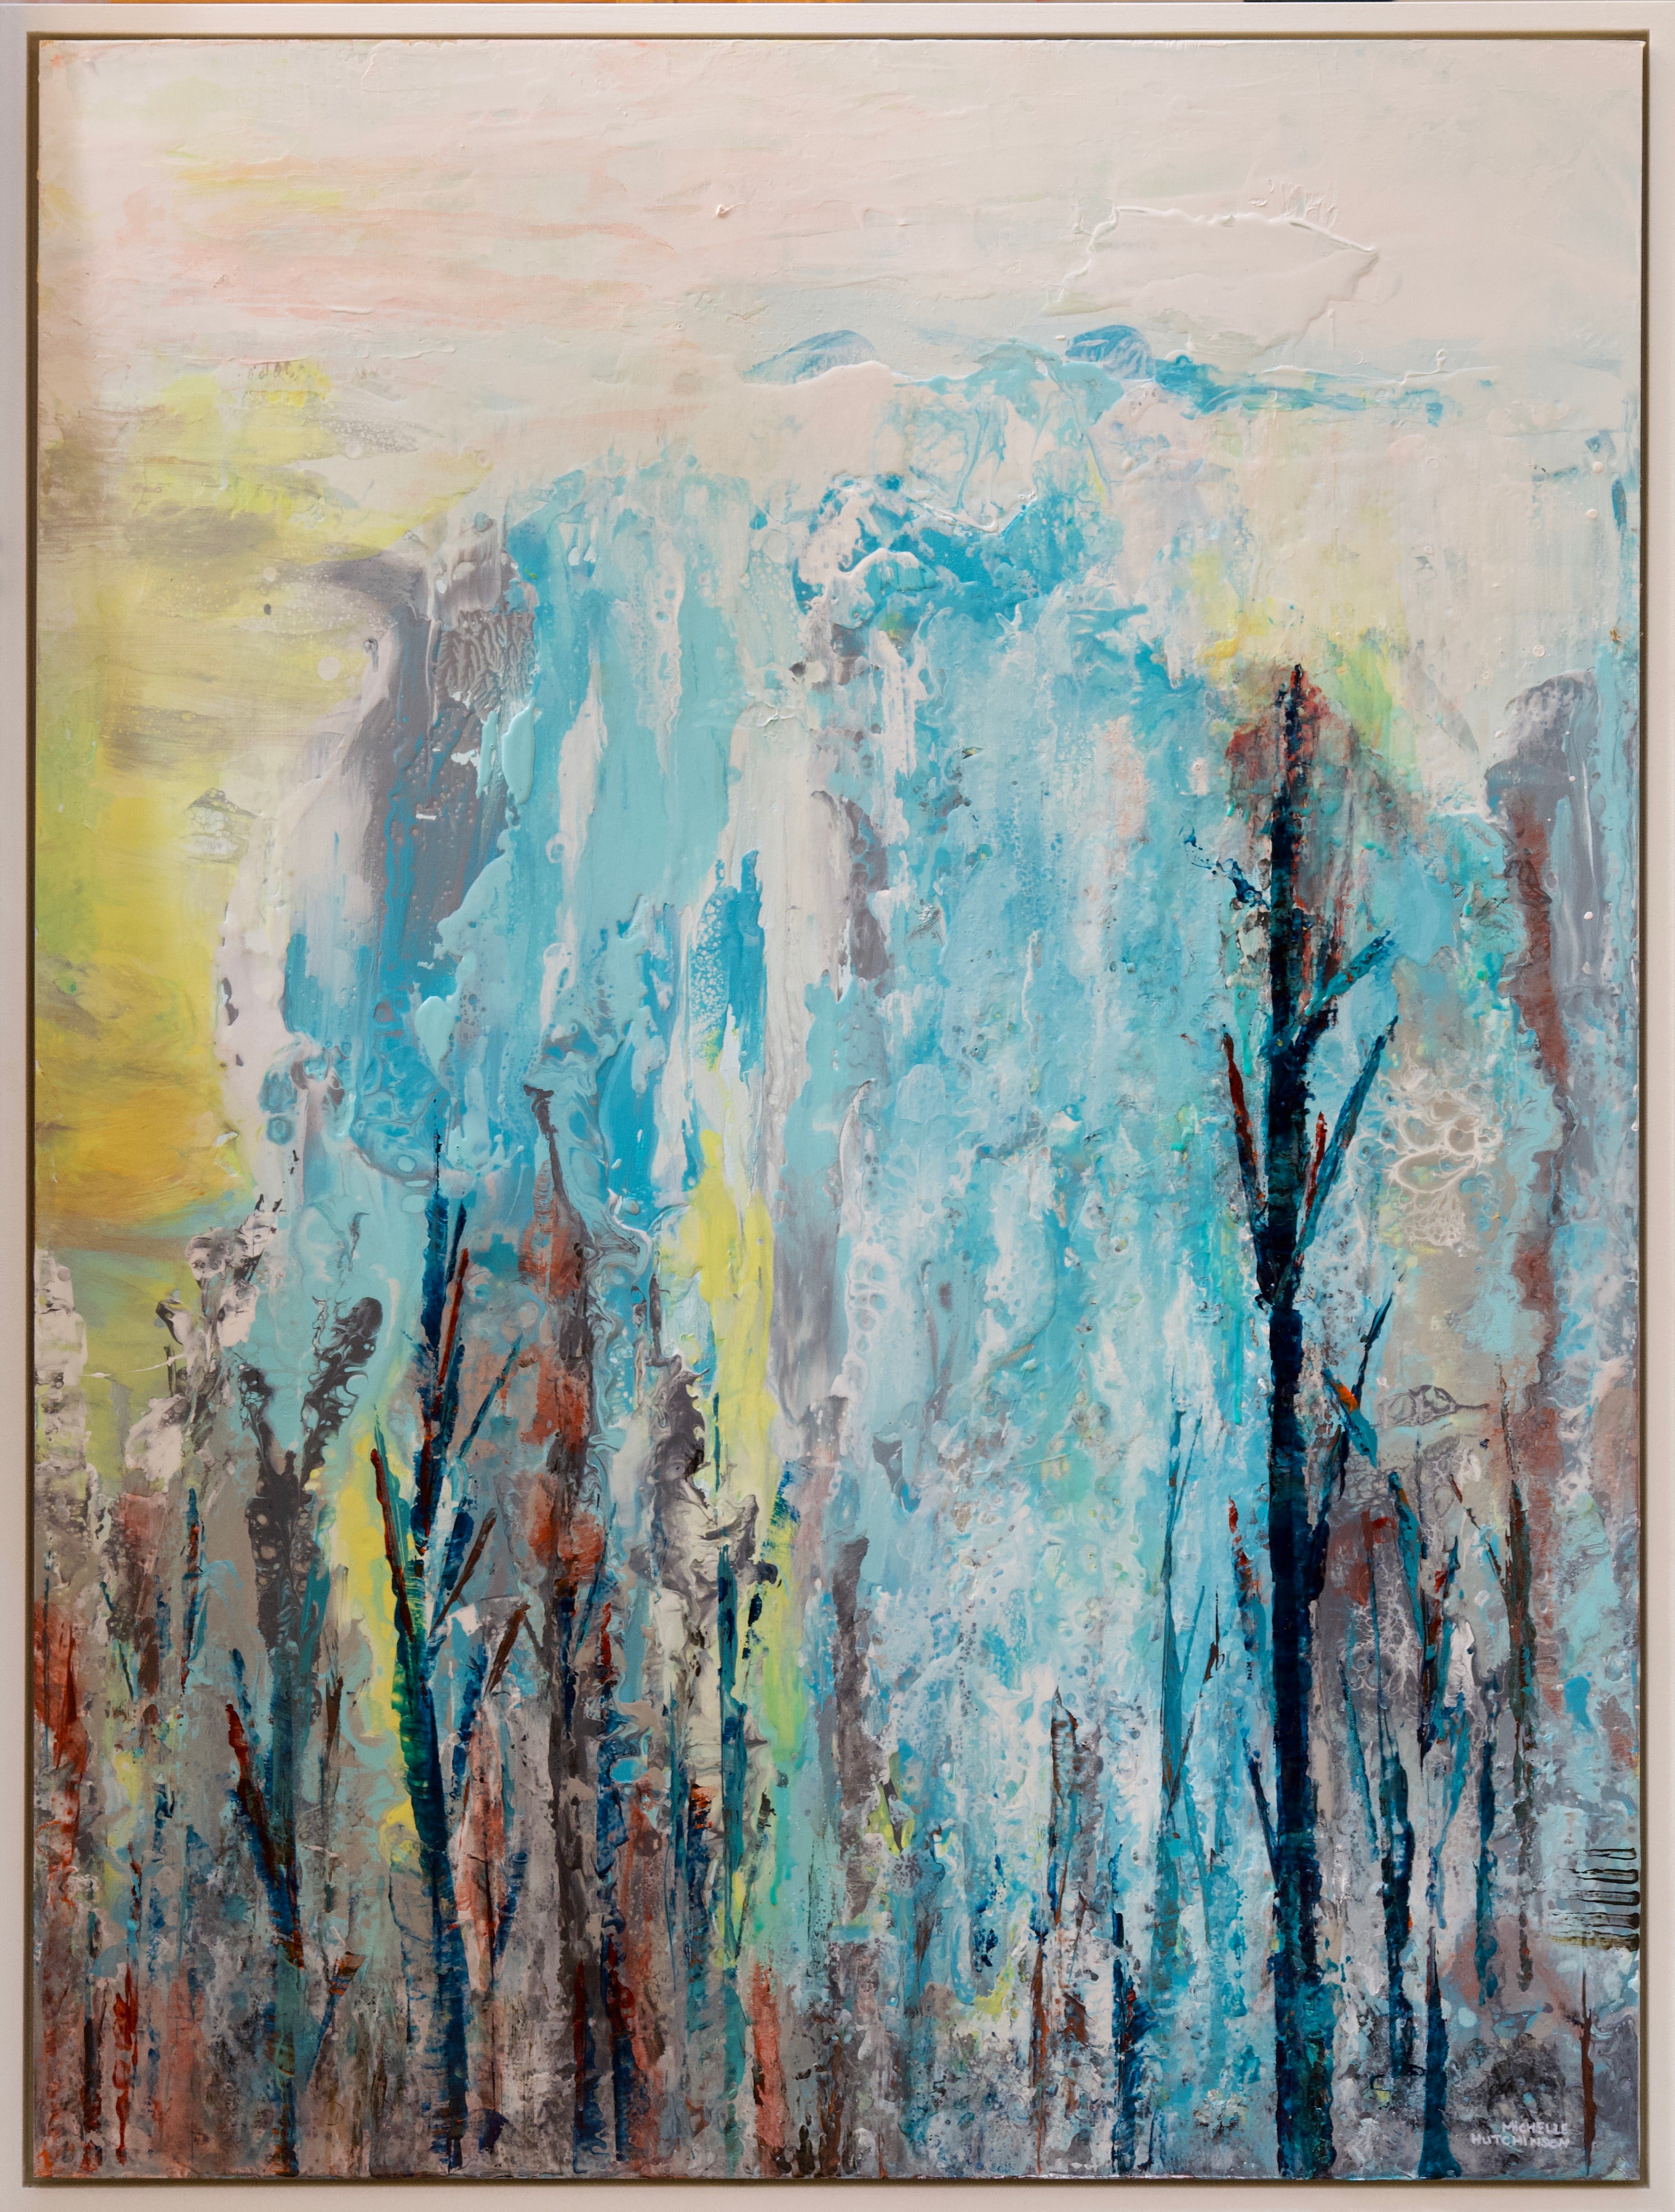 Bold abstract landscape depicts trees in the foreground with rocks and waterfall in the background. Painted in soft teals, yellows, and greys. Uses fluid acrylic pouring technique on wood panel. Includes custom white frame, bumper pads, and pre-mounted wires. Free shipping in N.A. No tax!